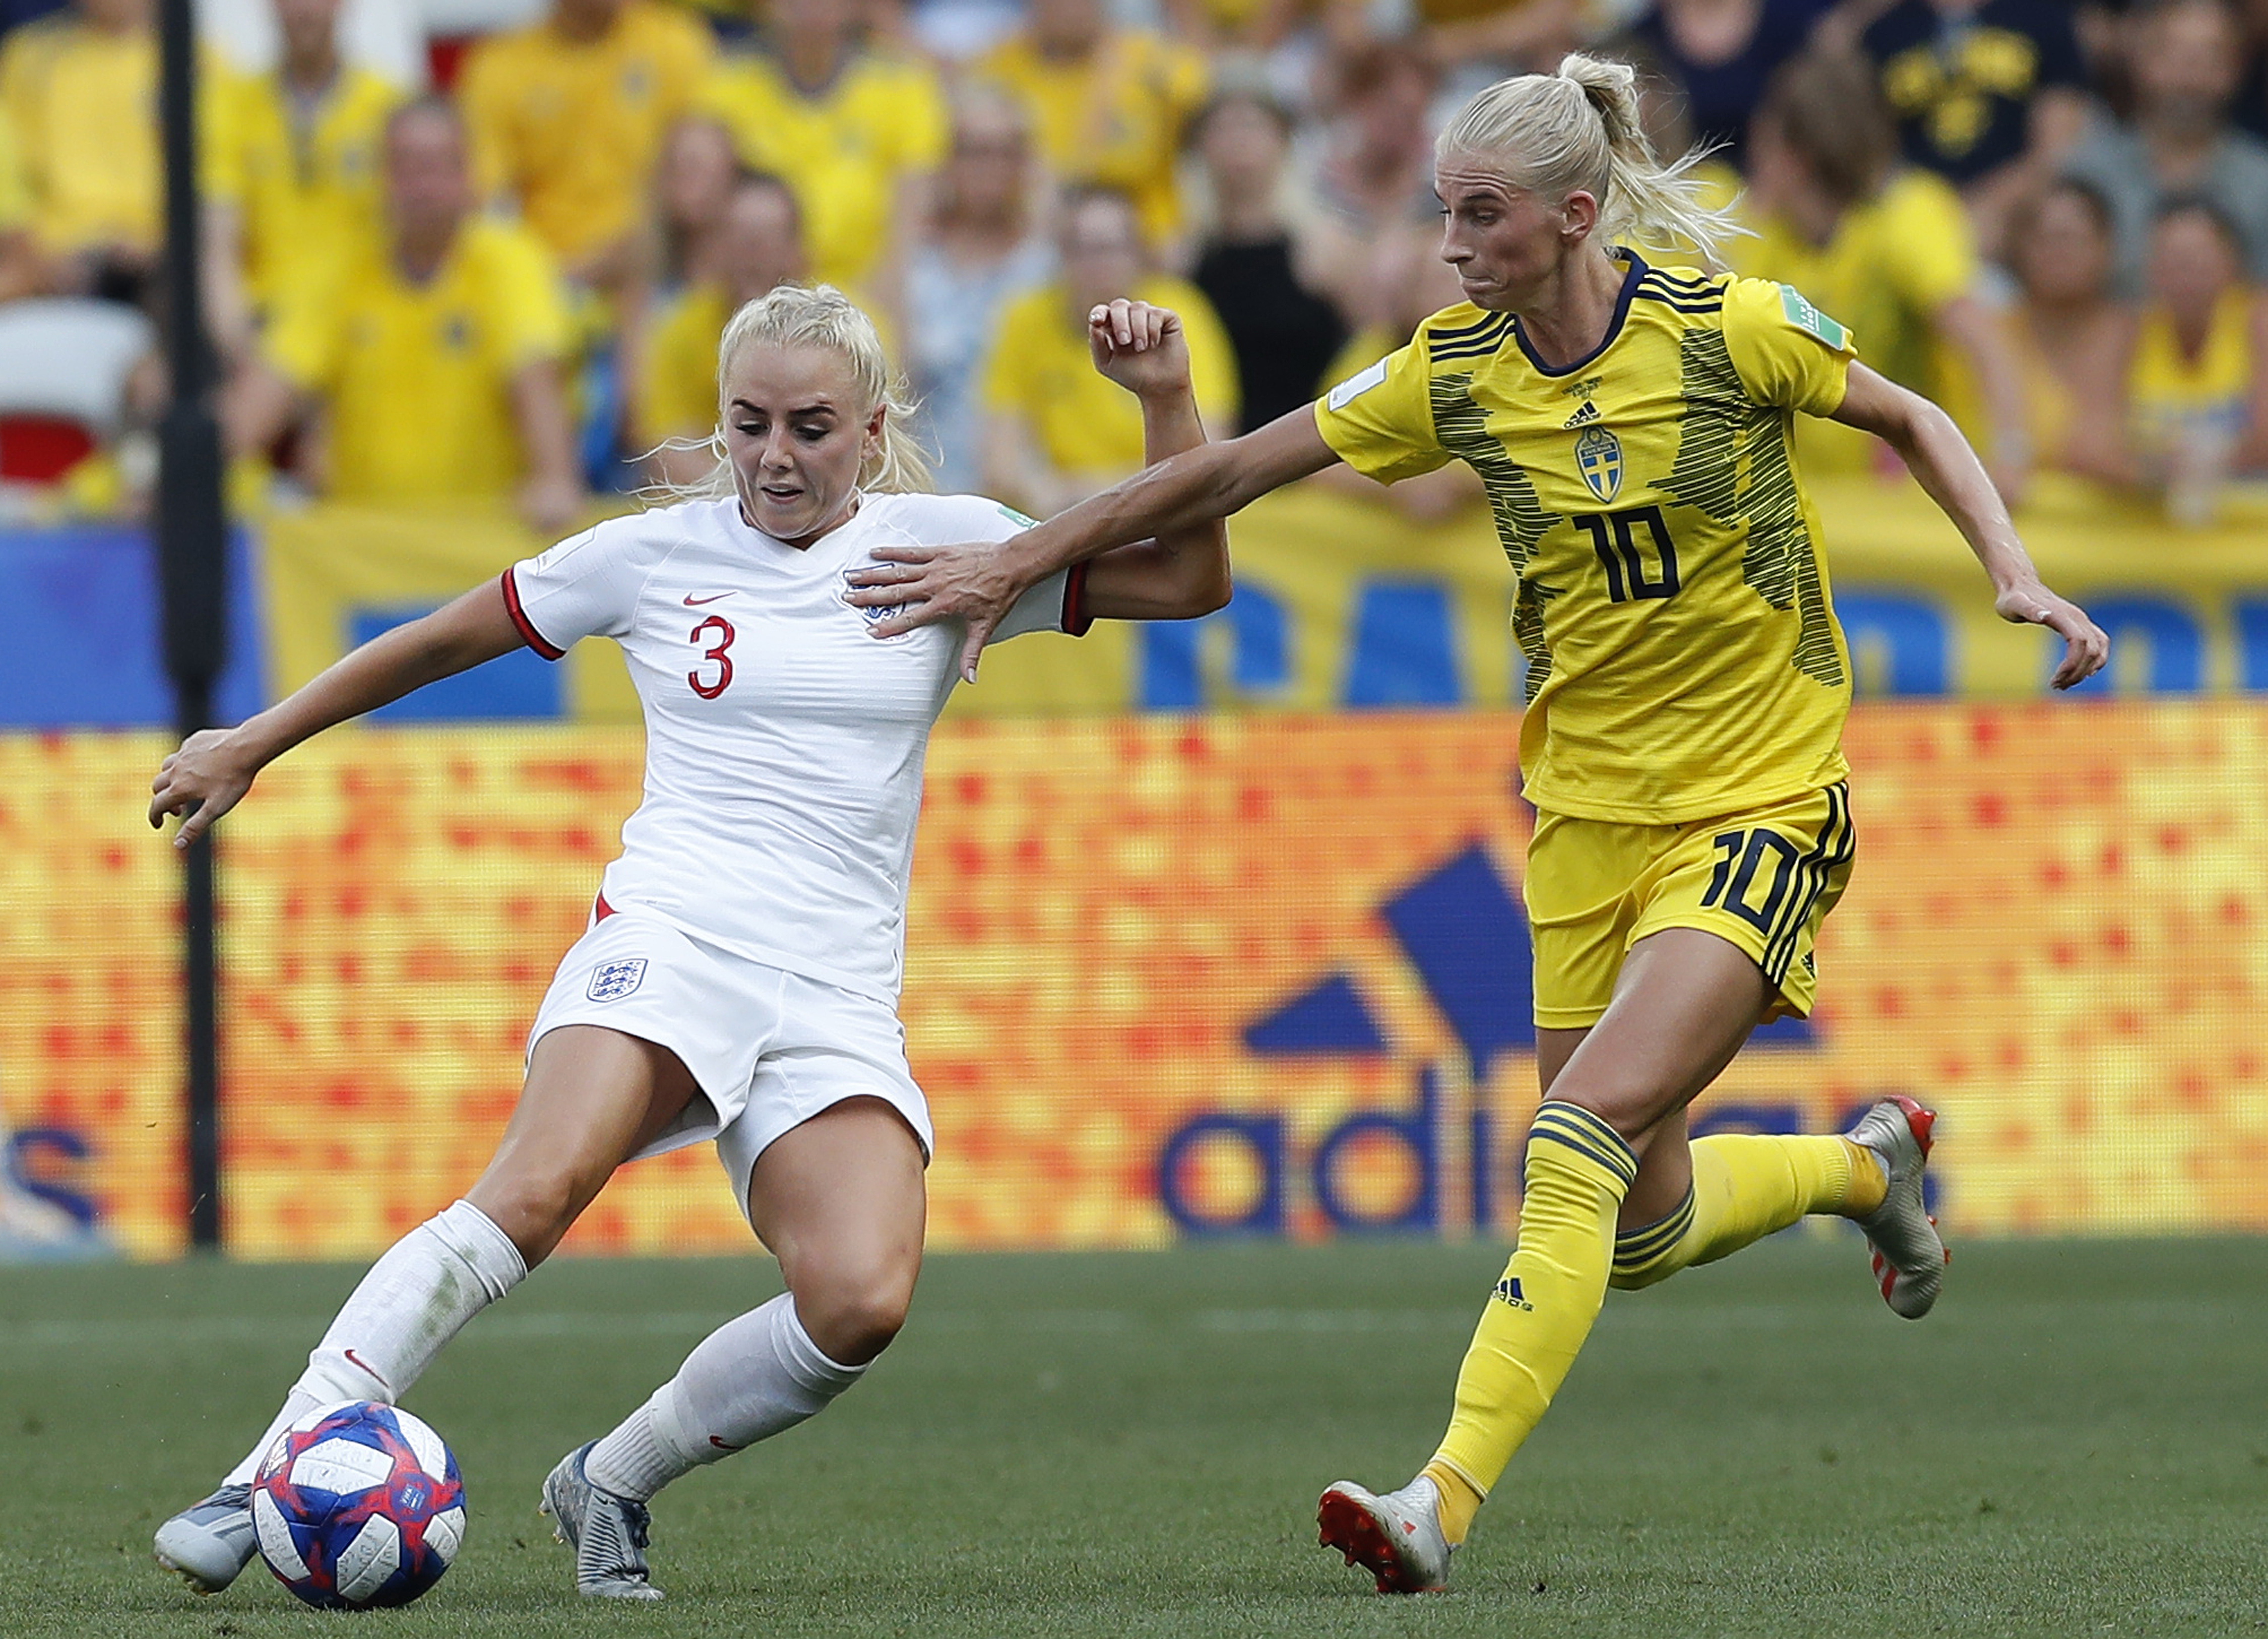 epa07699438 Alex Greenwood (L) of England in action against Sofia Jakobsson (R) of Sweden during the FIFA Women's World Cup 2019 soccer match for third place between England vs Sweden in Nice, France, 06 July 2019.  EPA/SEBASTIEN NOGIER